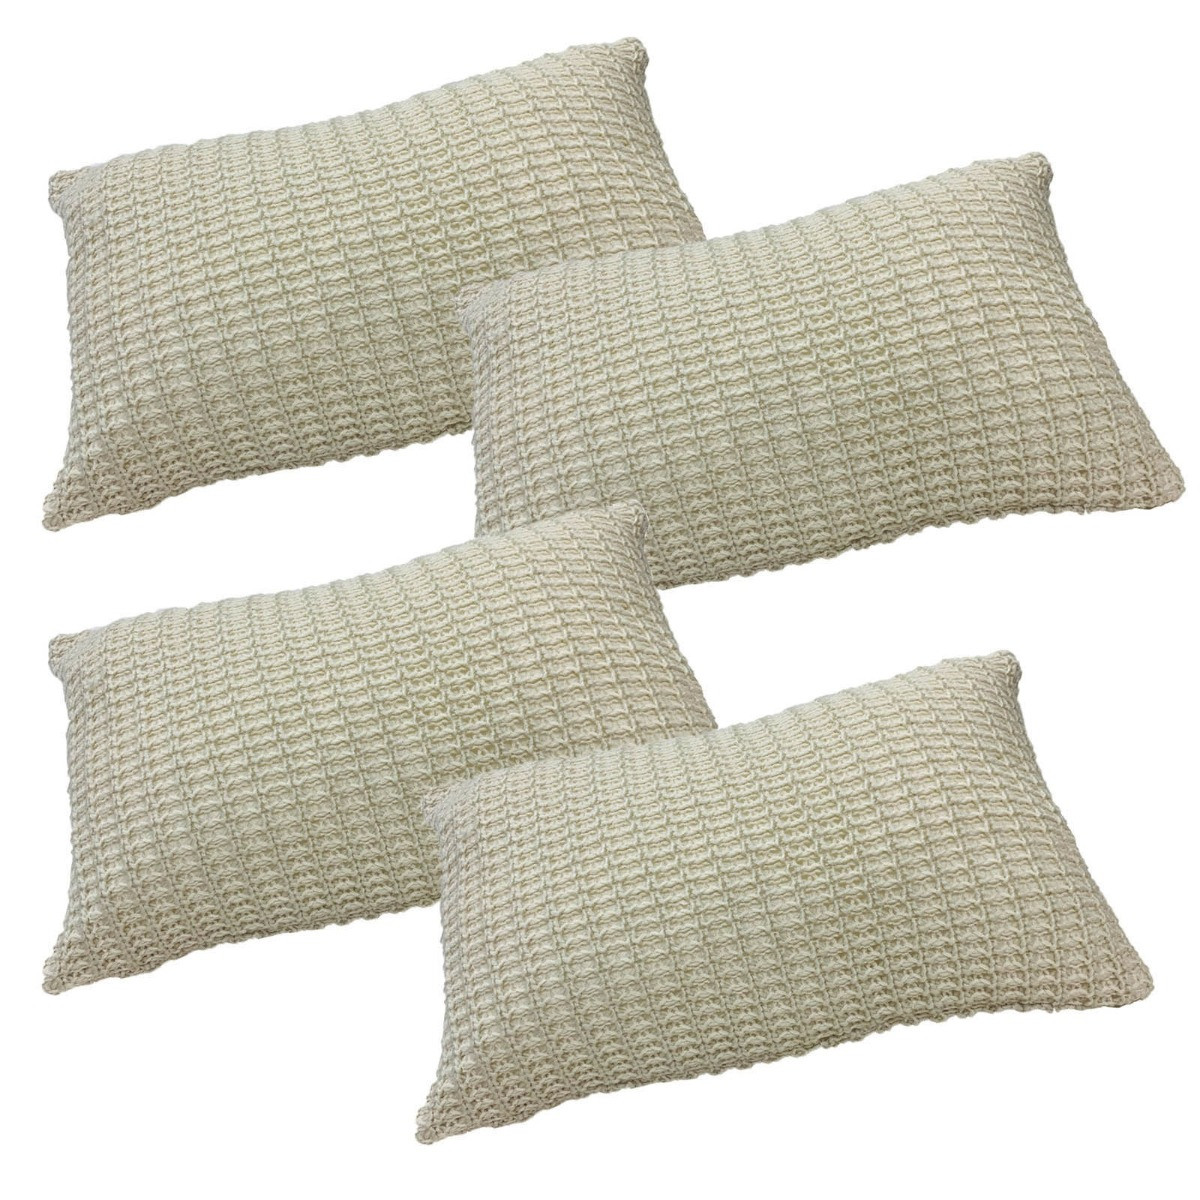 Pack of 4 Dreamscene Soft Knitted Cushion Cover 30x45cm Unfilled - Biscuit>